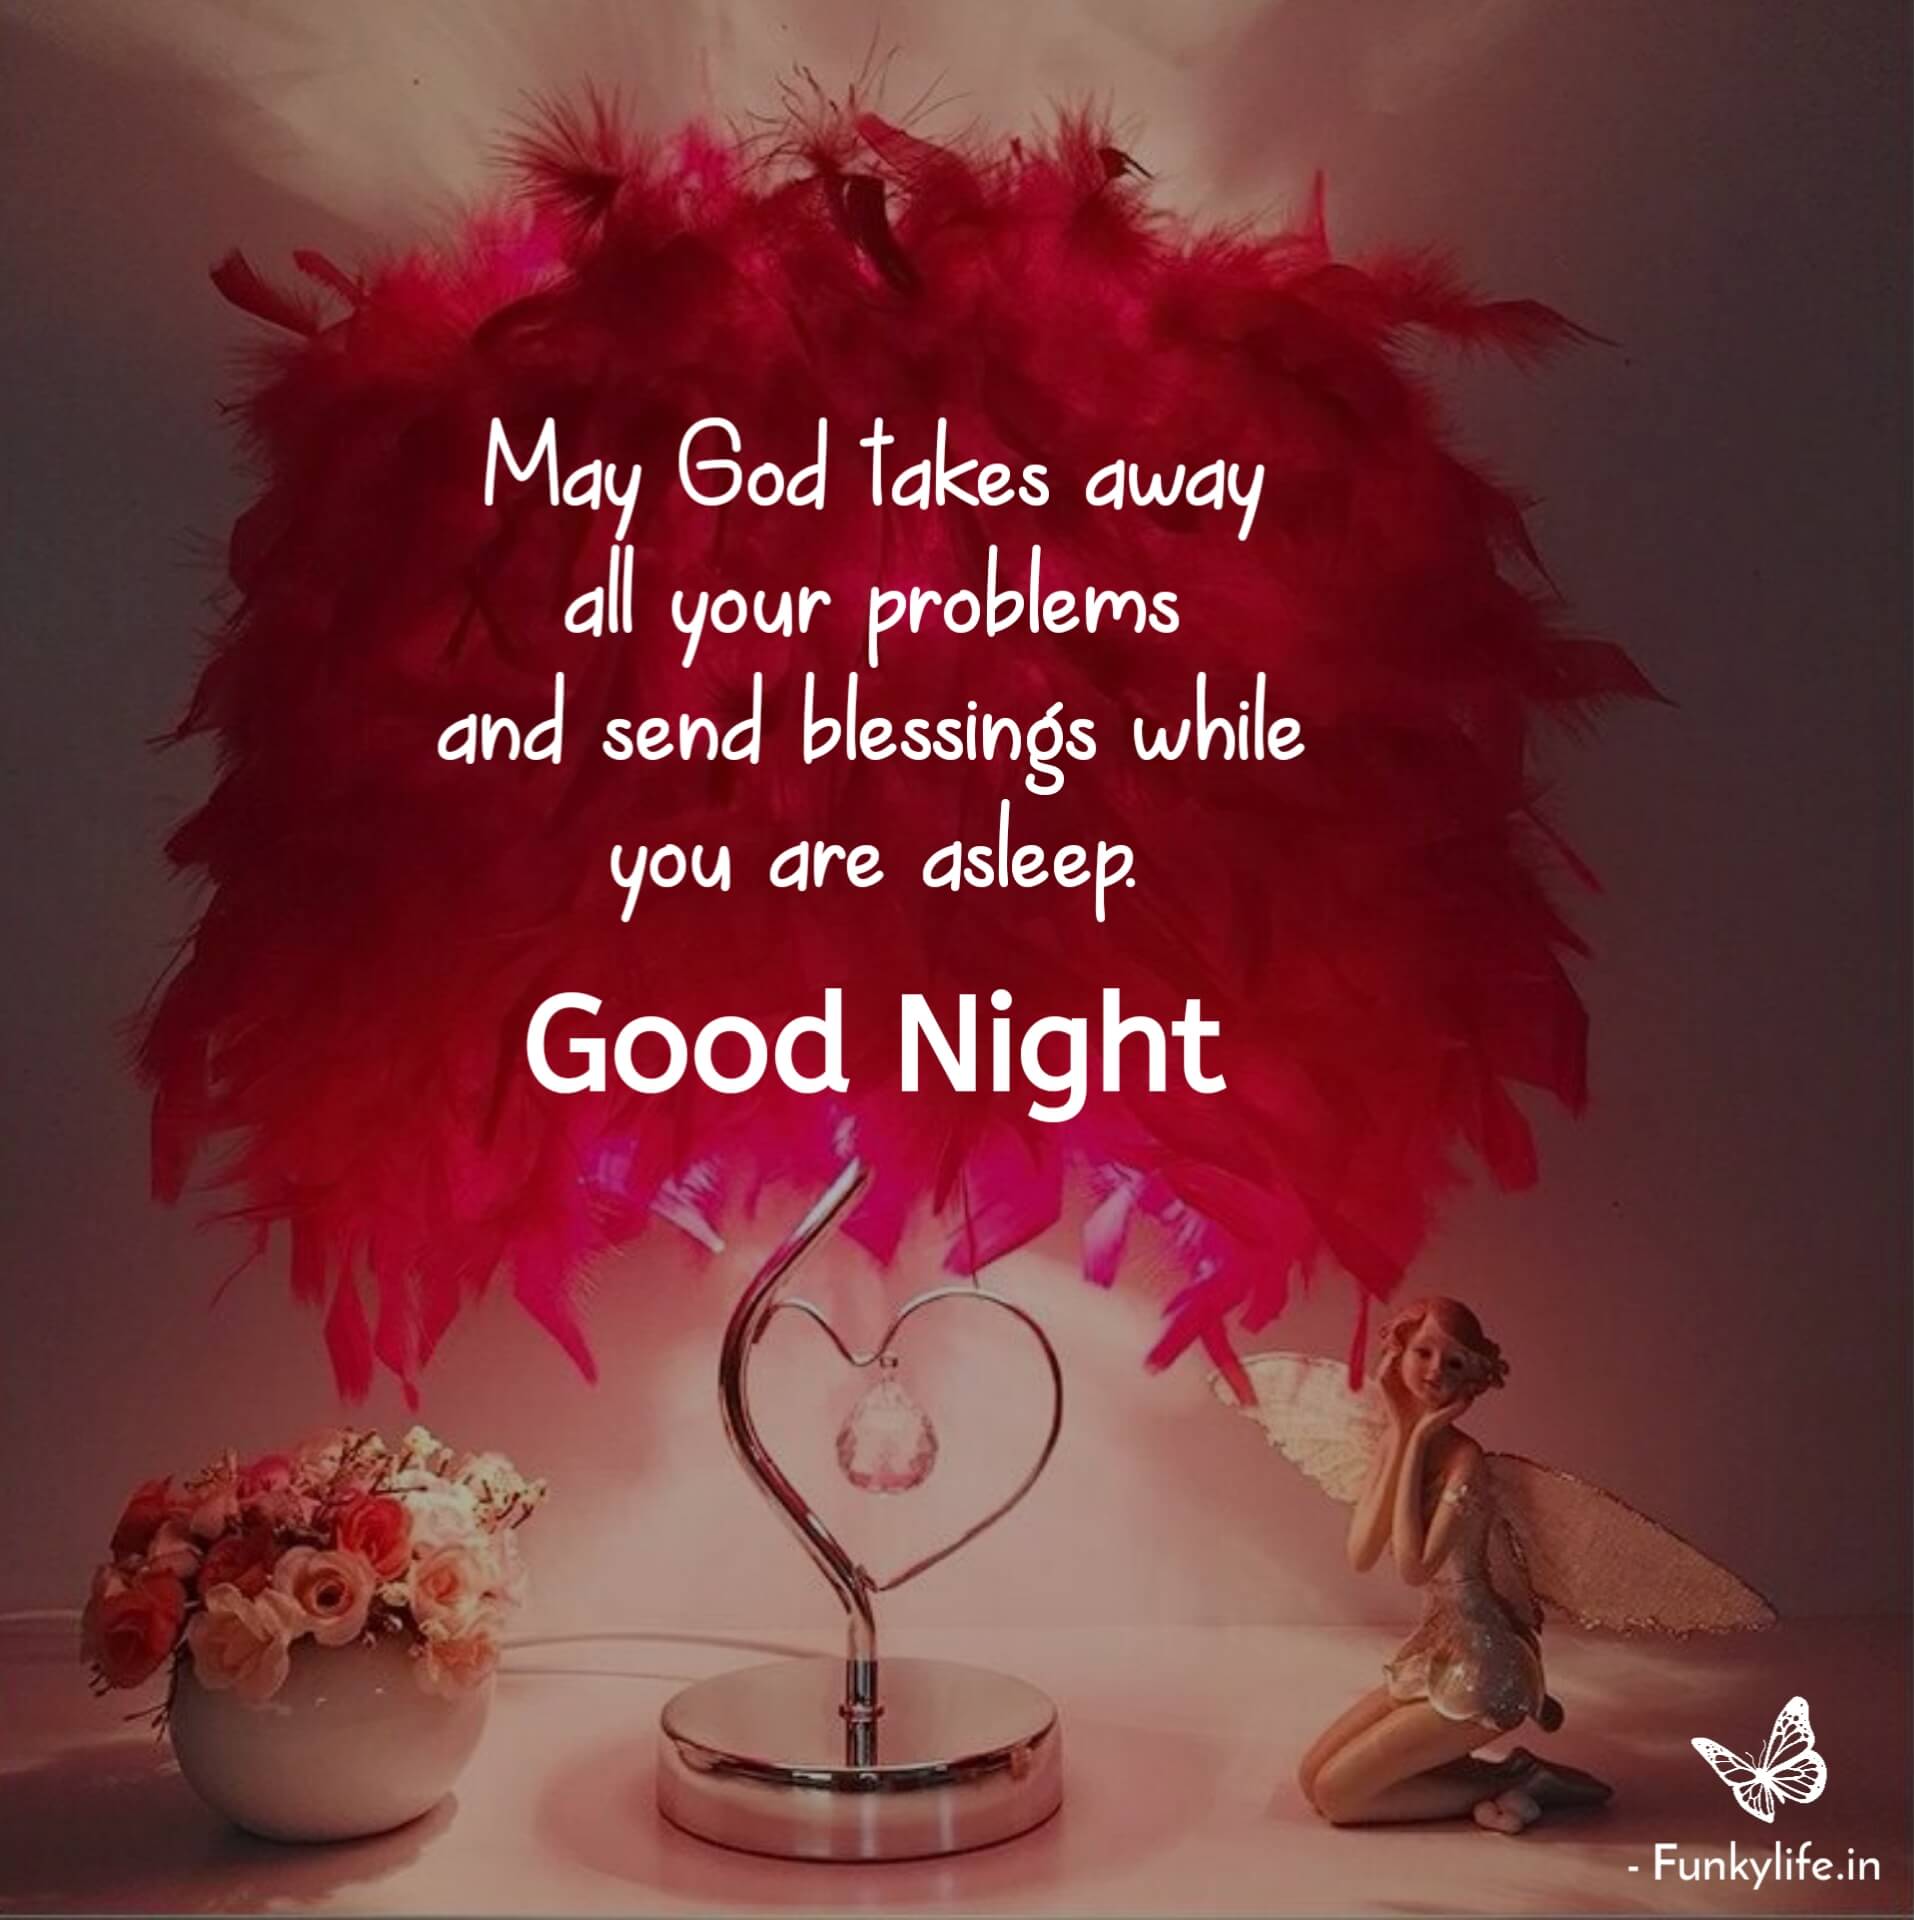 Good Night SMS Pictures